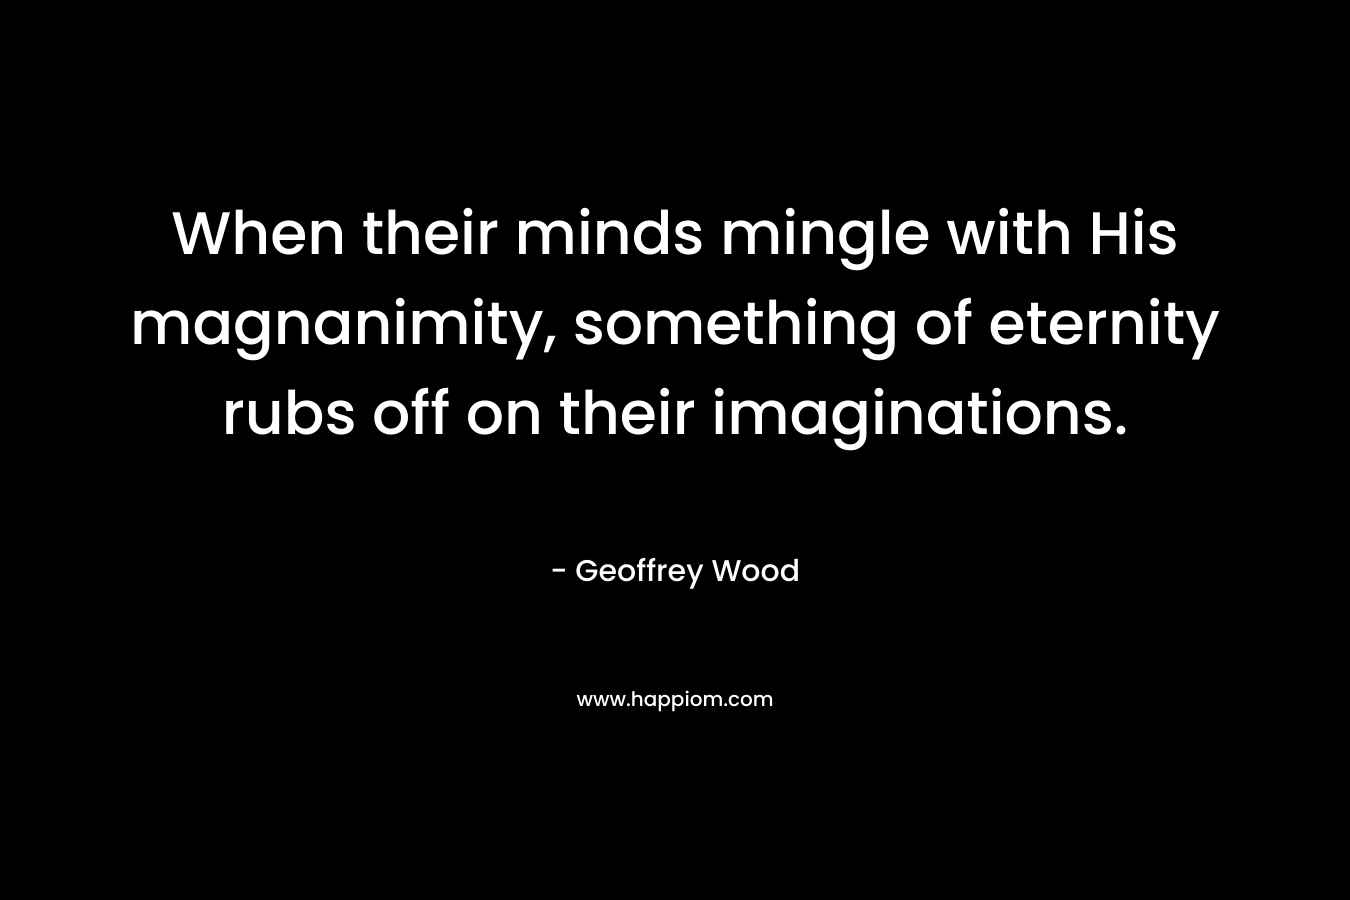 When their minds mingle with His magnanimity, something of eternity rubs off on their imaginations. – Geoffrey Wood